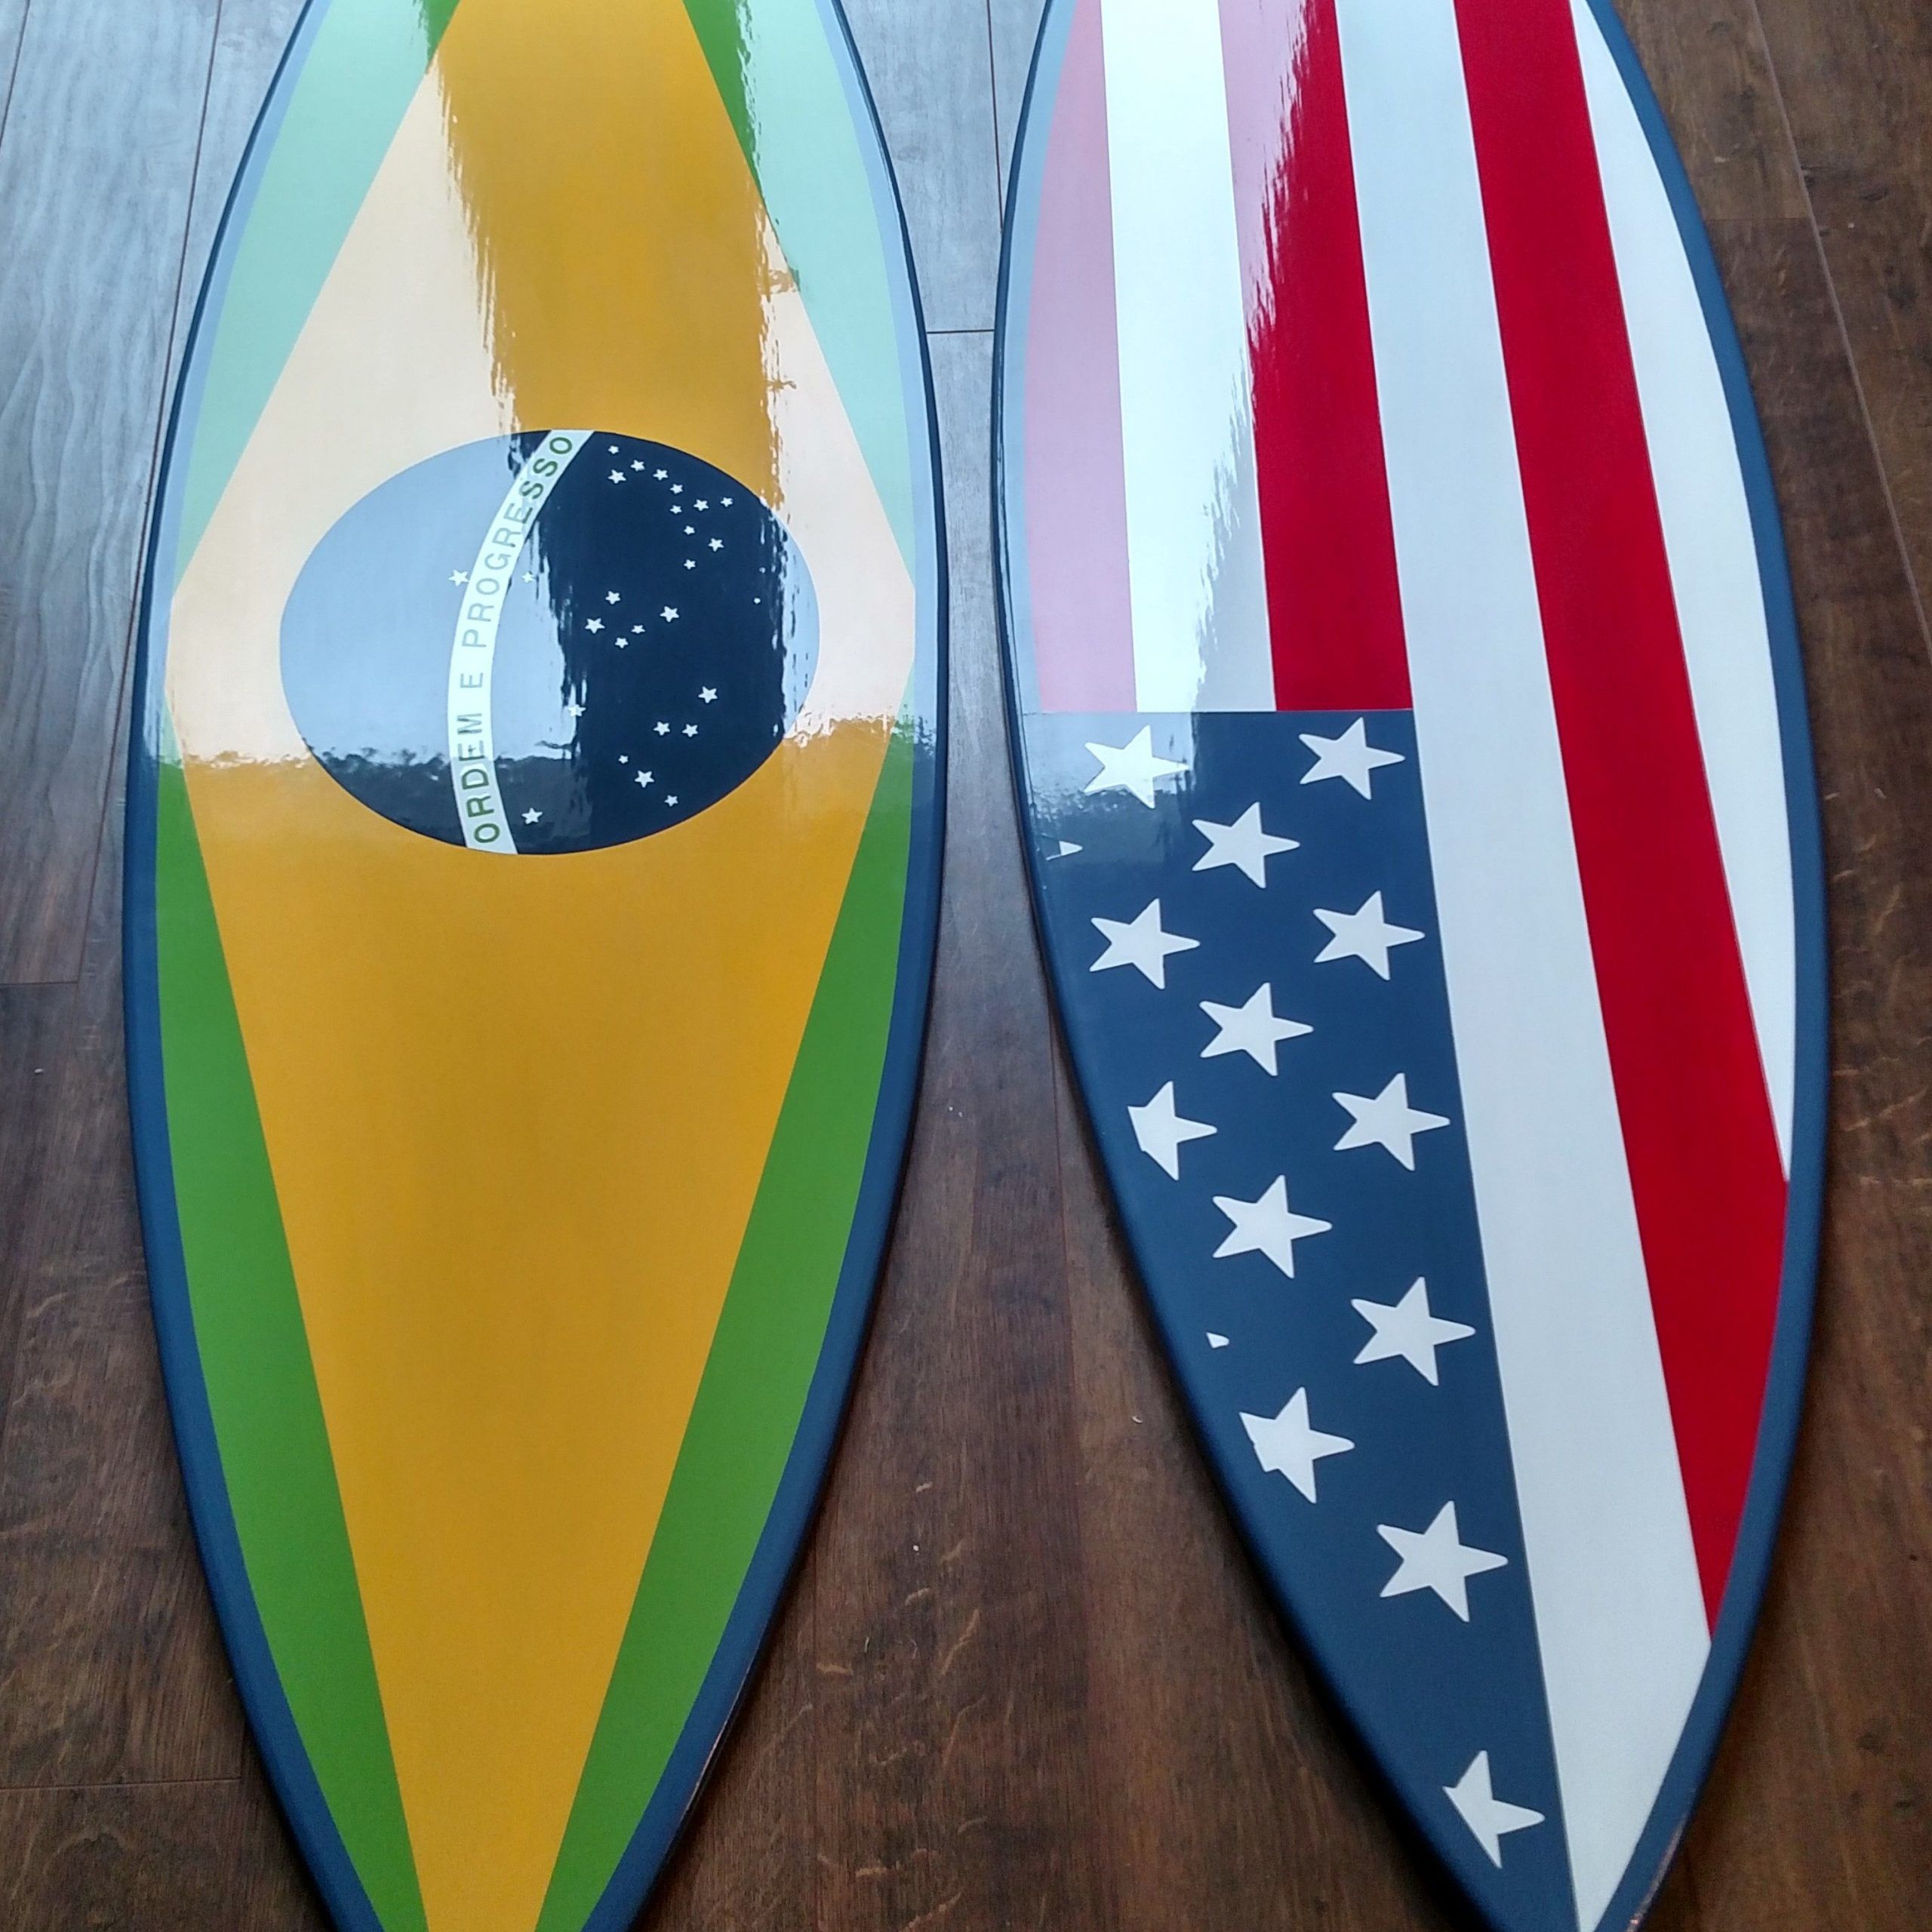 Buy A Custom Surfboard Wall Art American Flag Or Brazil For Recent Surfing Wall Art (View 11 of 20)